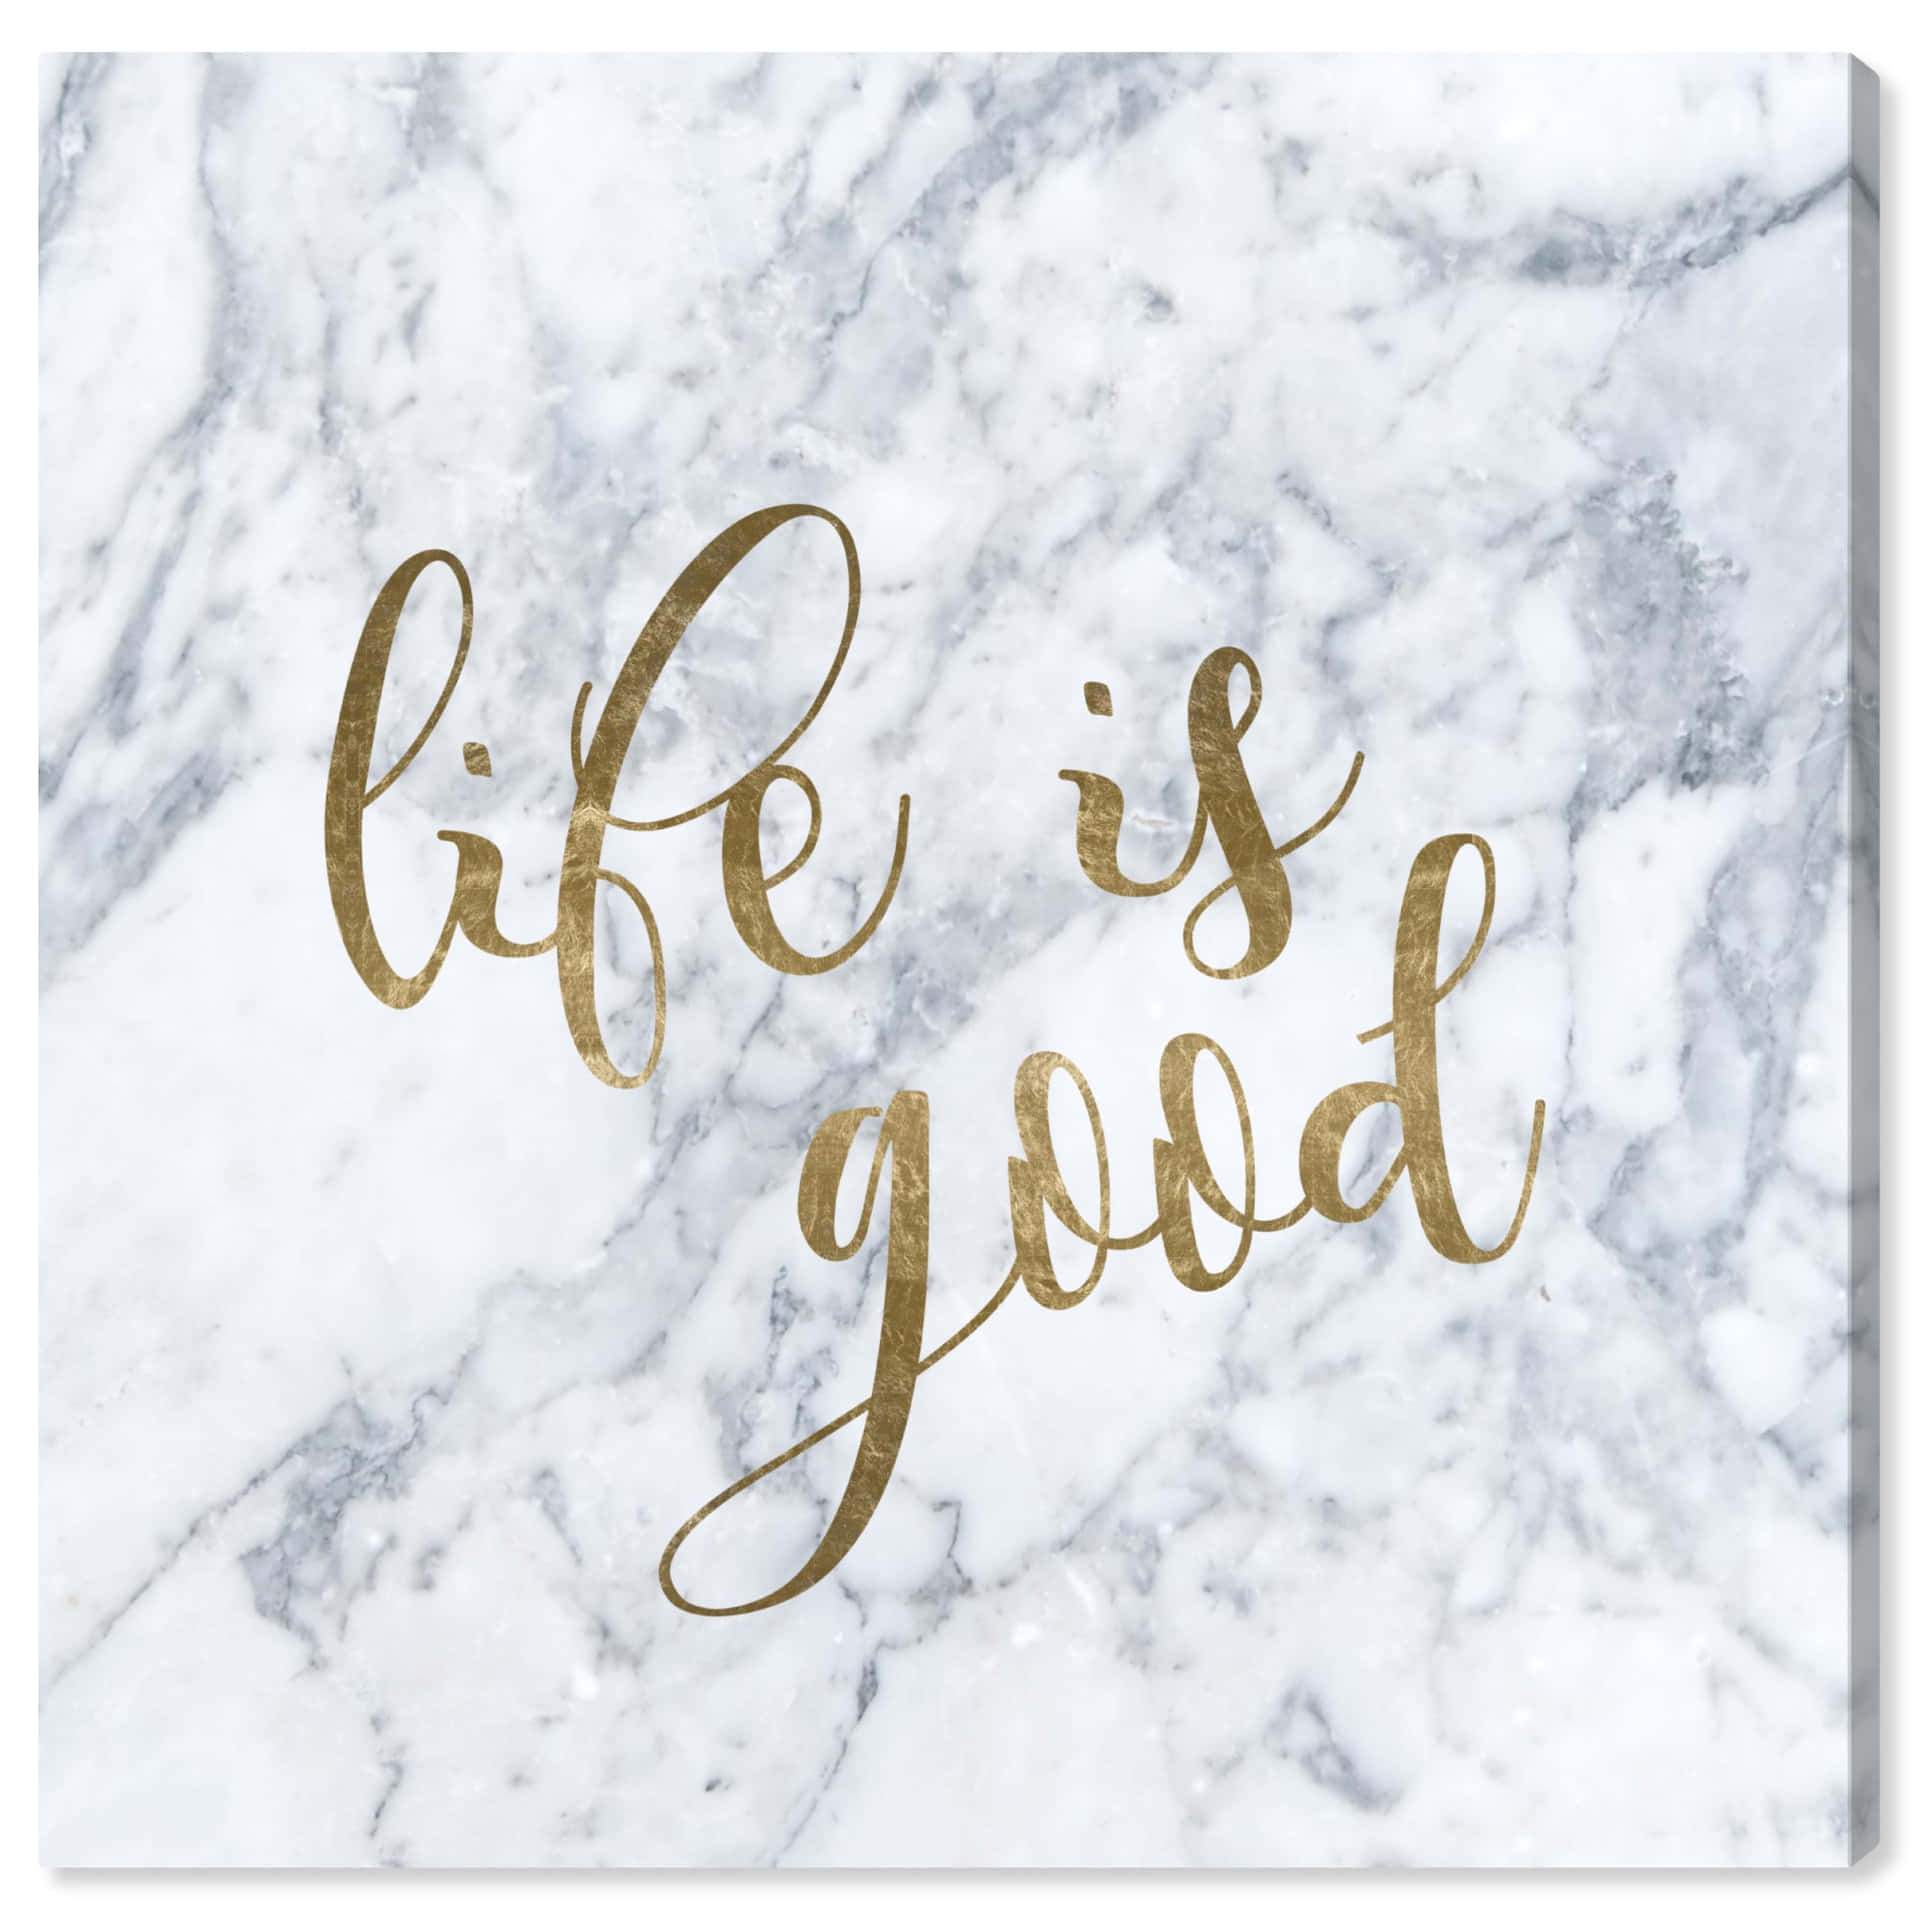 Life Is Good On Marble Wallpaper